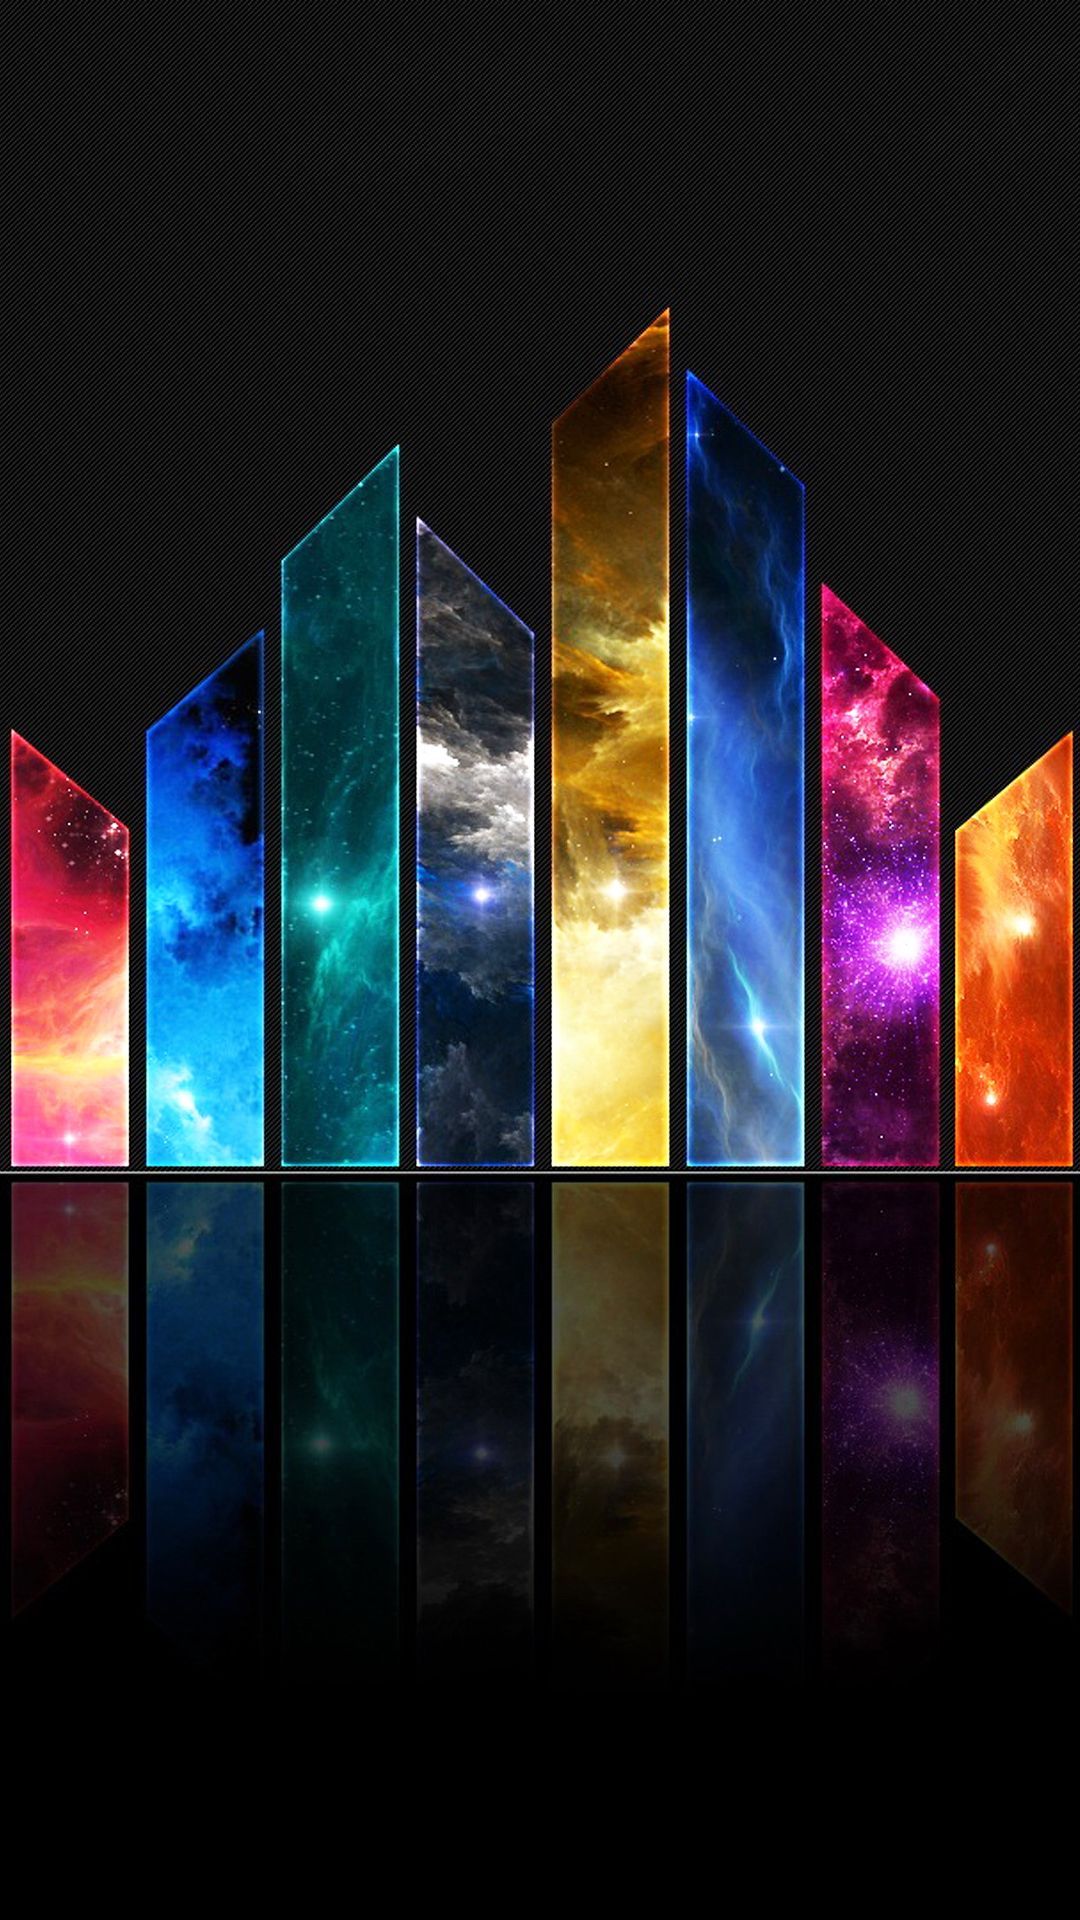 Abstract Glass Shards Universe Space Colors Android Wallpaper. Android wallpaper, Color wallpaper iphone, Abstract wallpaper